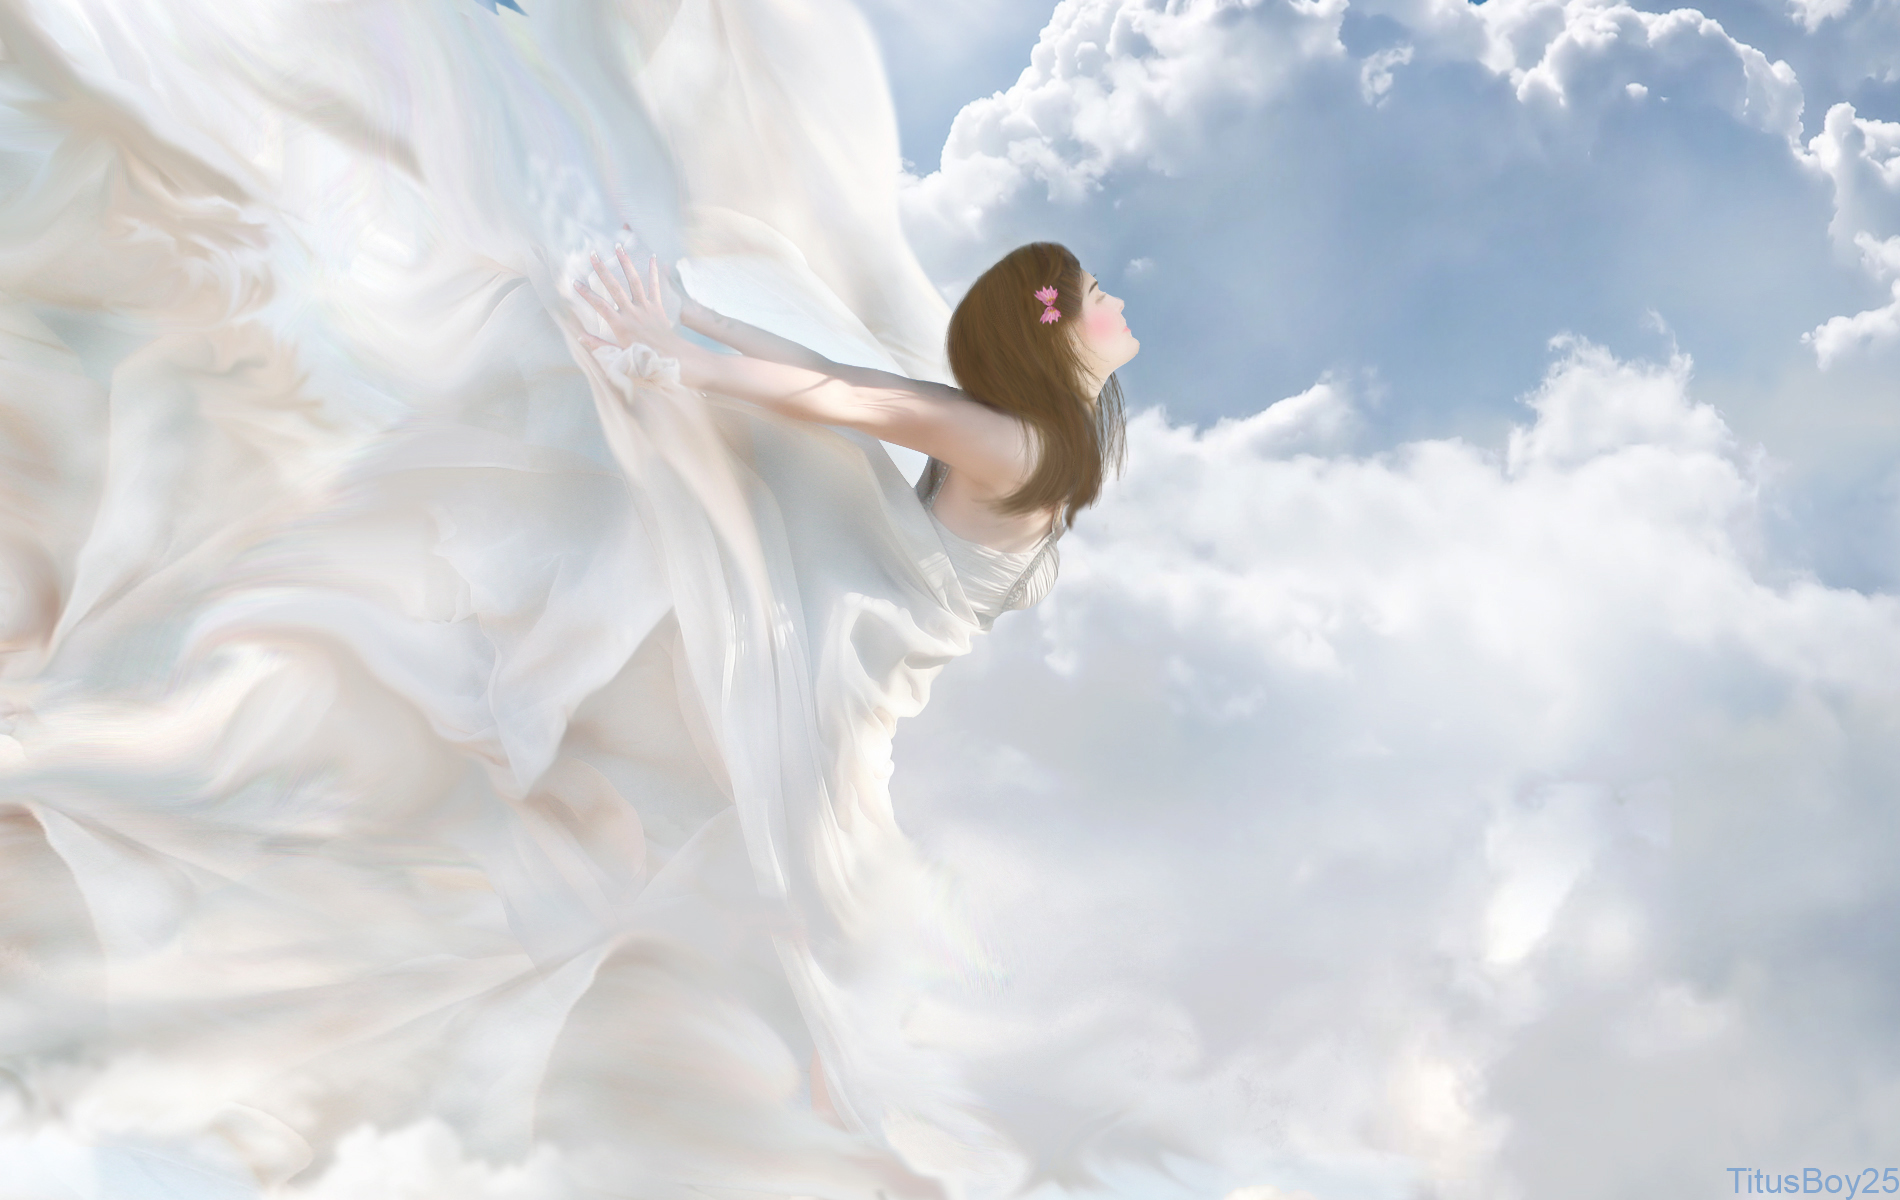 620 Fantasy Angel HD Wallpapers and Backgrounds